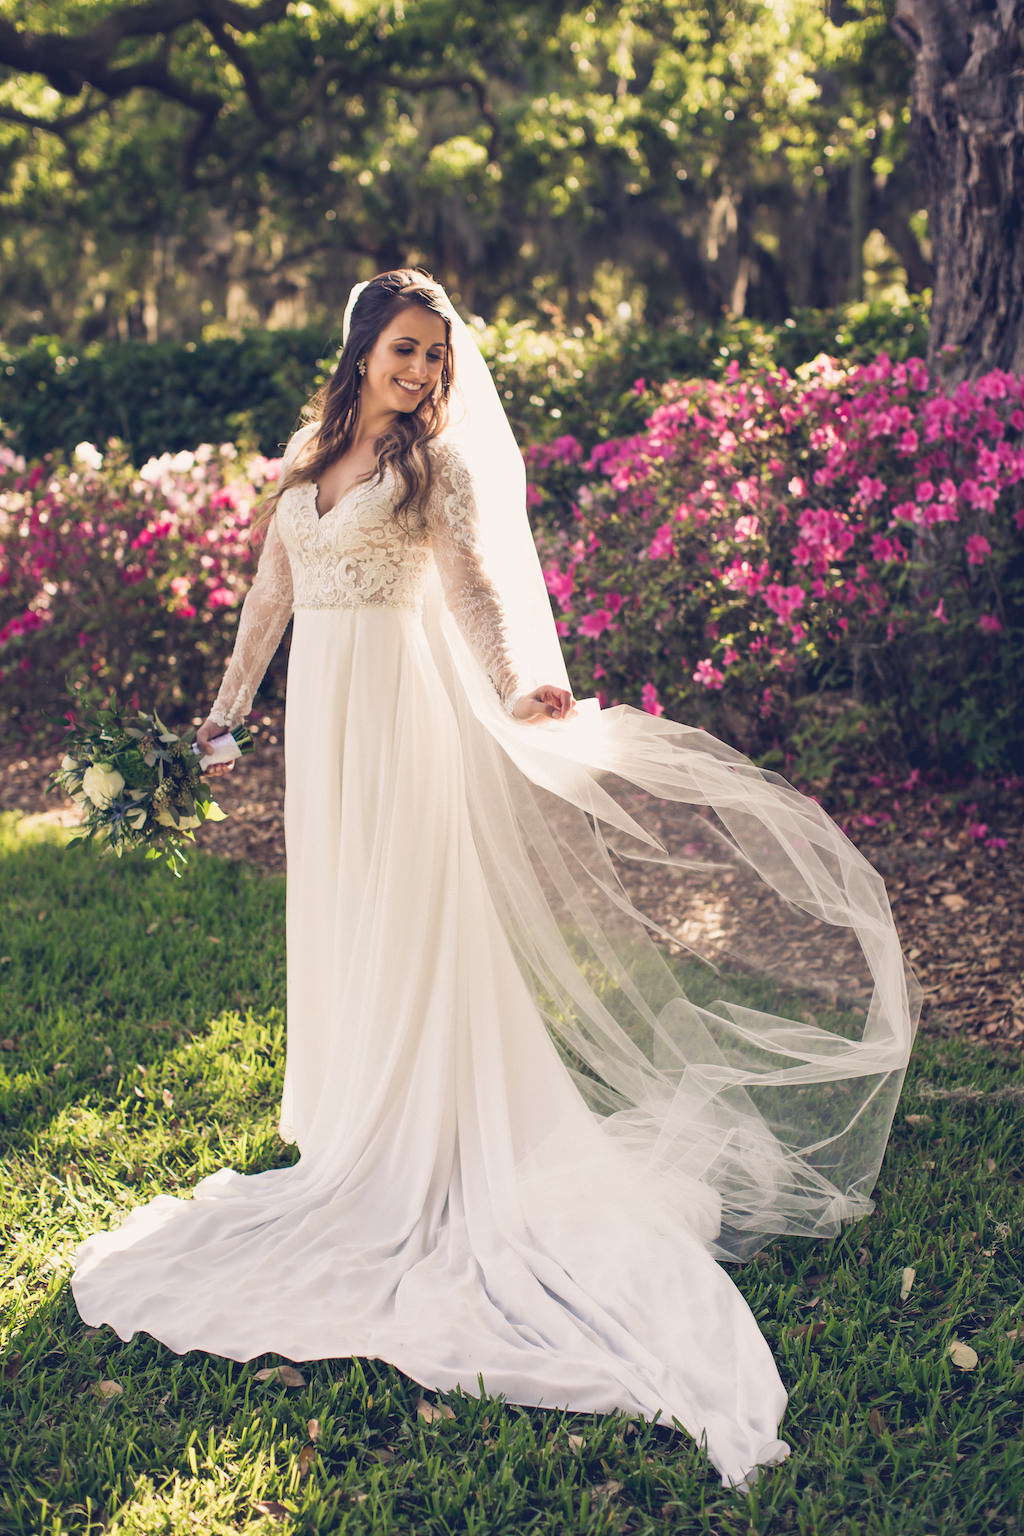 Simple Chic Romantic, Florida Bride in Boho Flowy Lace and Illusion Long Sleeve Wedding Dress with Long Cathedral Veil | Tampa Bay Wedding Photographer Luxe Light Images